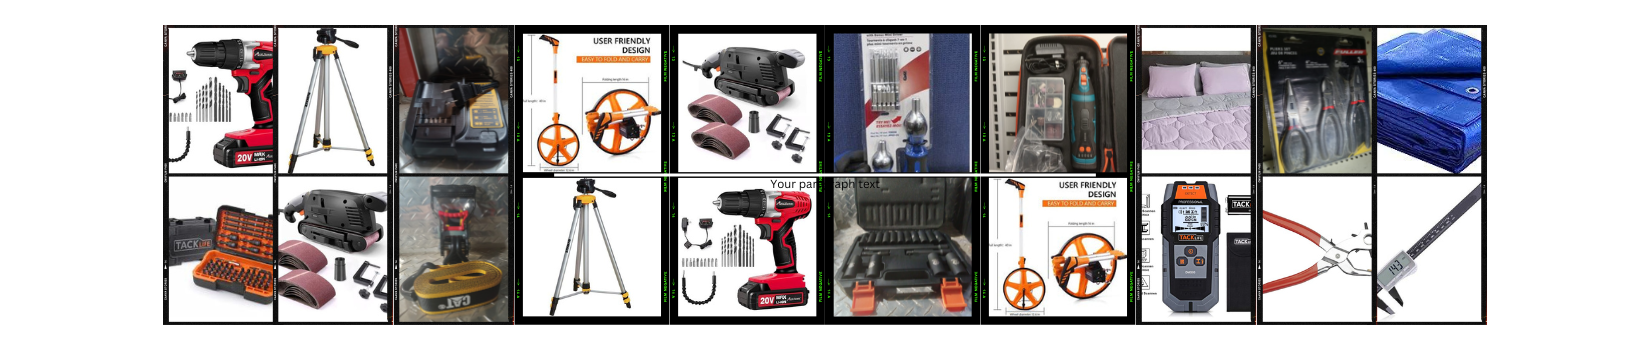 Zehr's Sales July 20th Lawn Equipment, TOOLS, TOOLS and More!